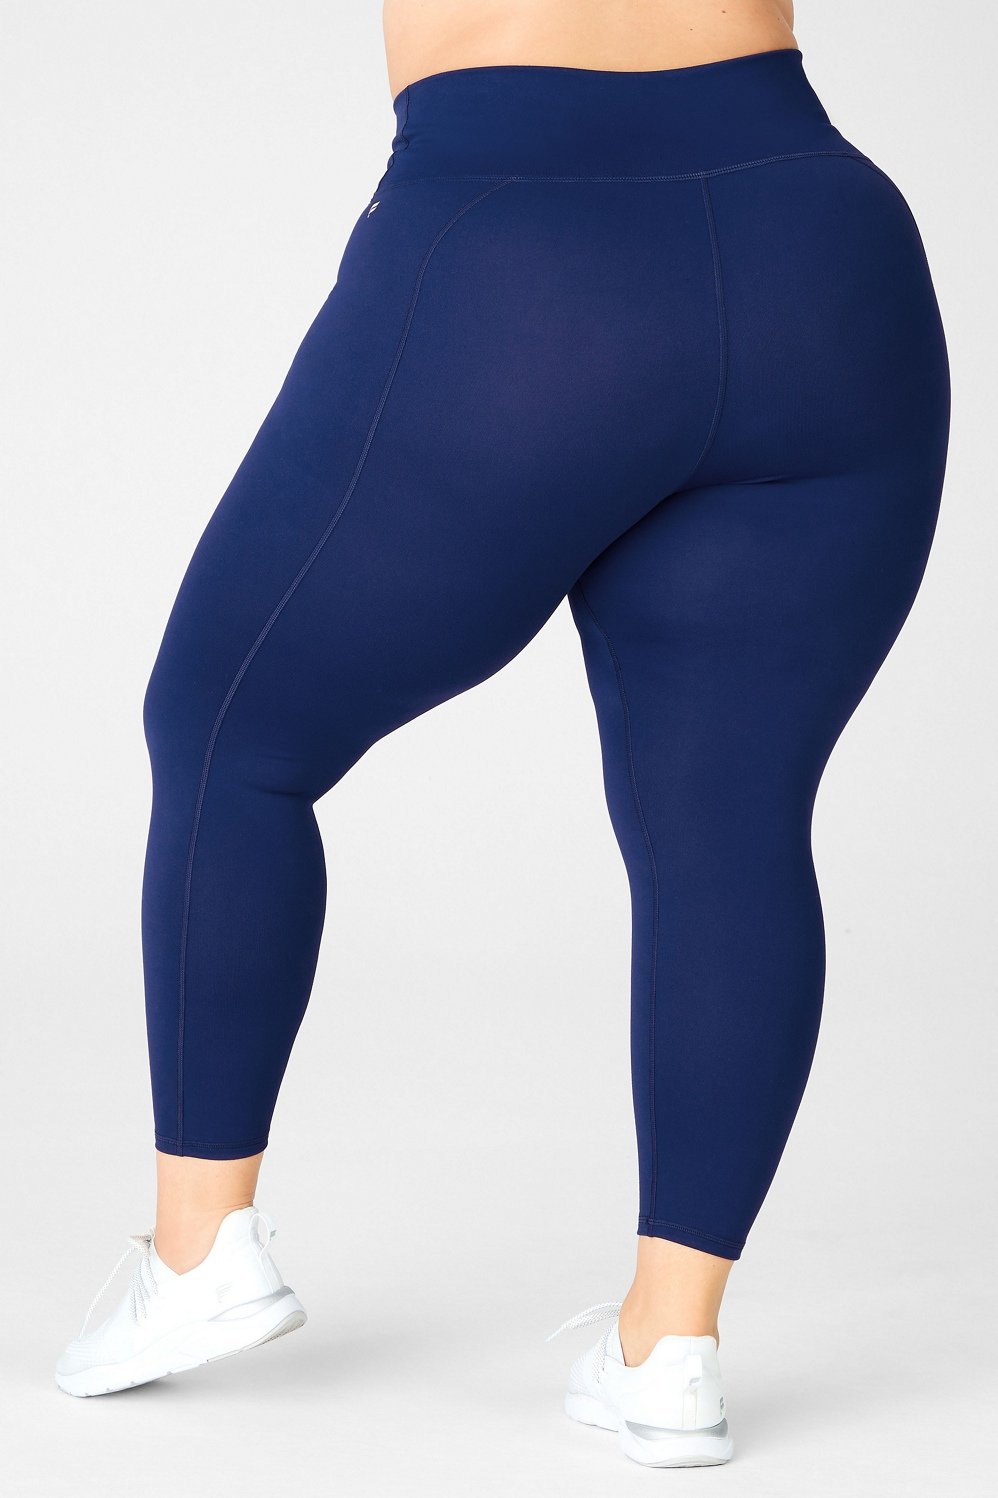 High Waisted Royal Blue Leggings - One Size - Free Shipping & Returns